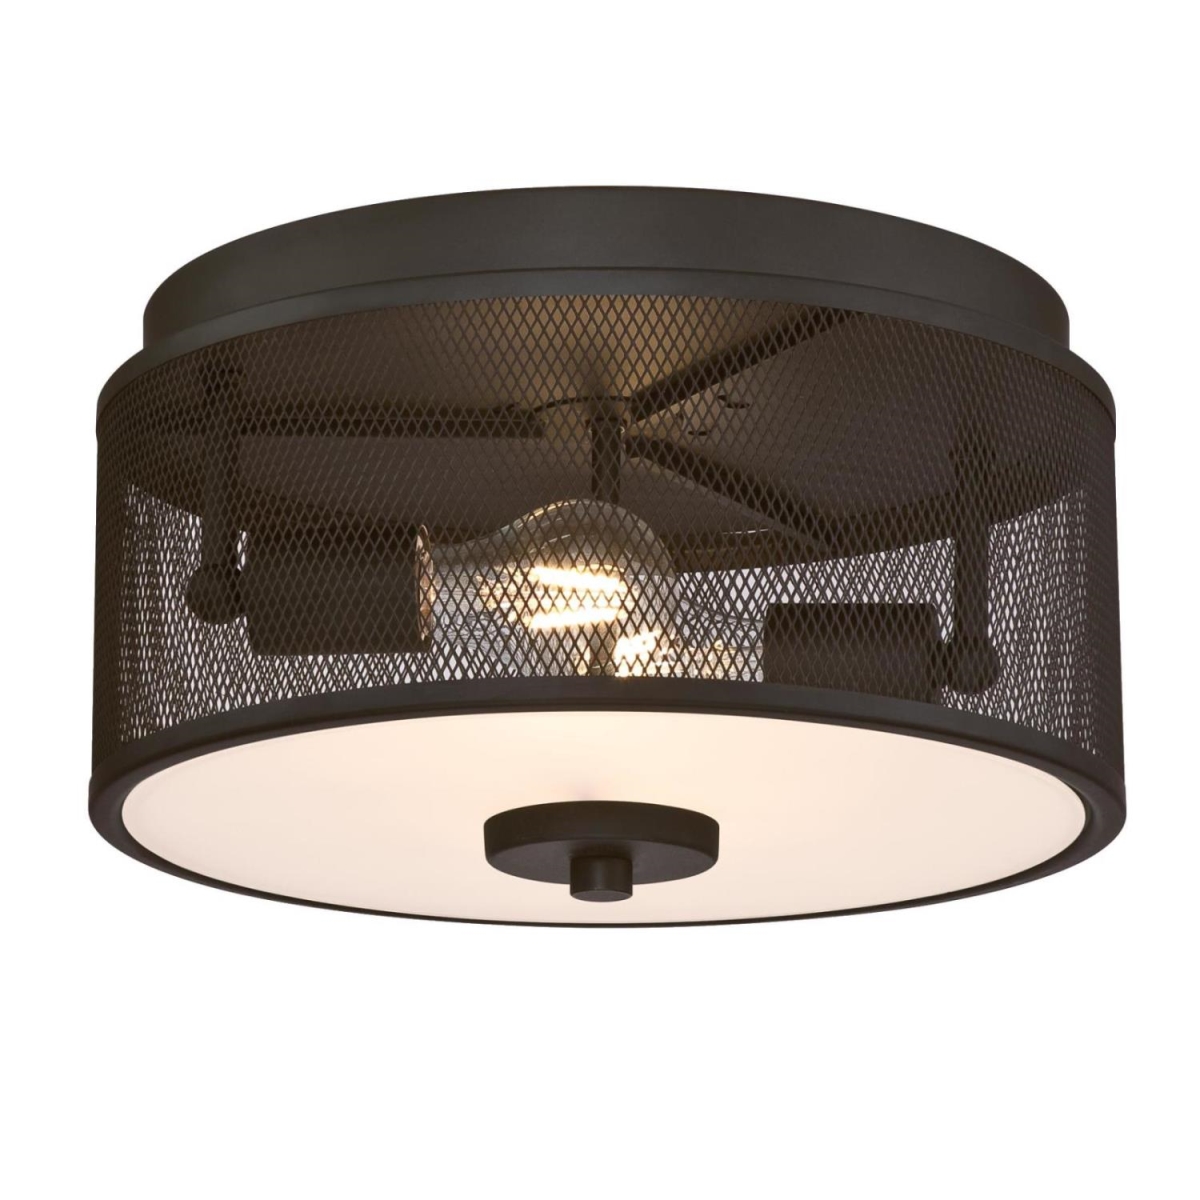 6371100 13 In. 2 Light Flush With Mesh Shade & Frosted Glass - Oil Rubbed Bronze